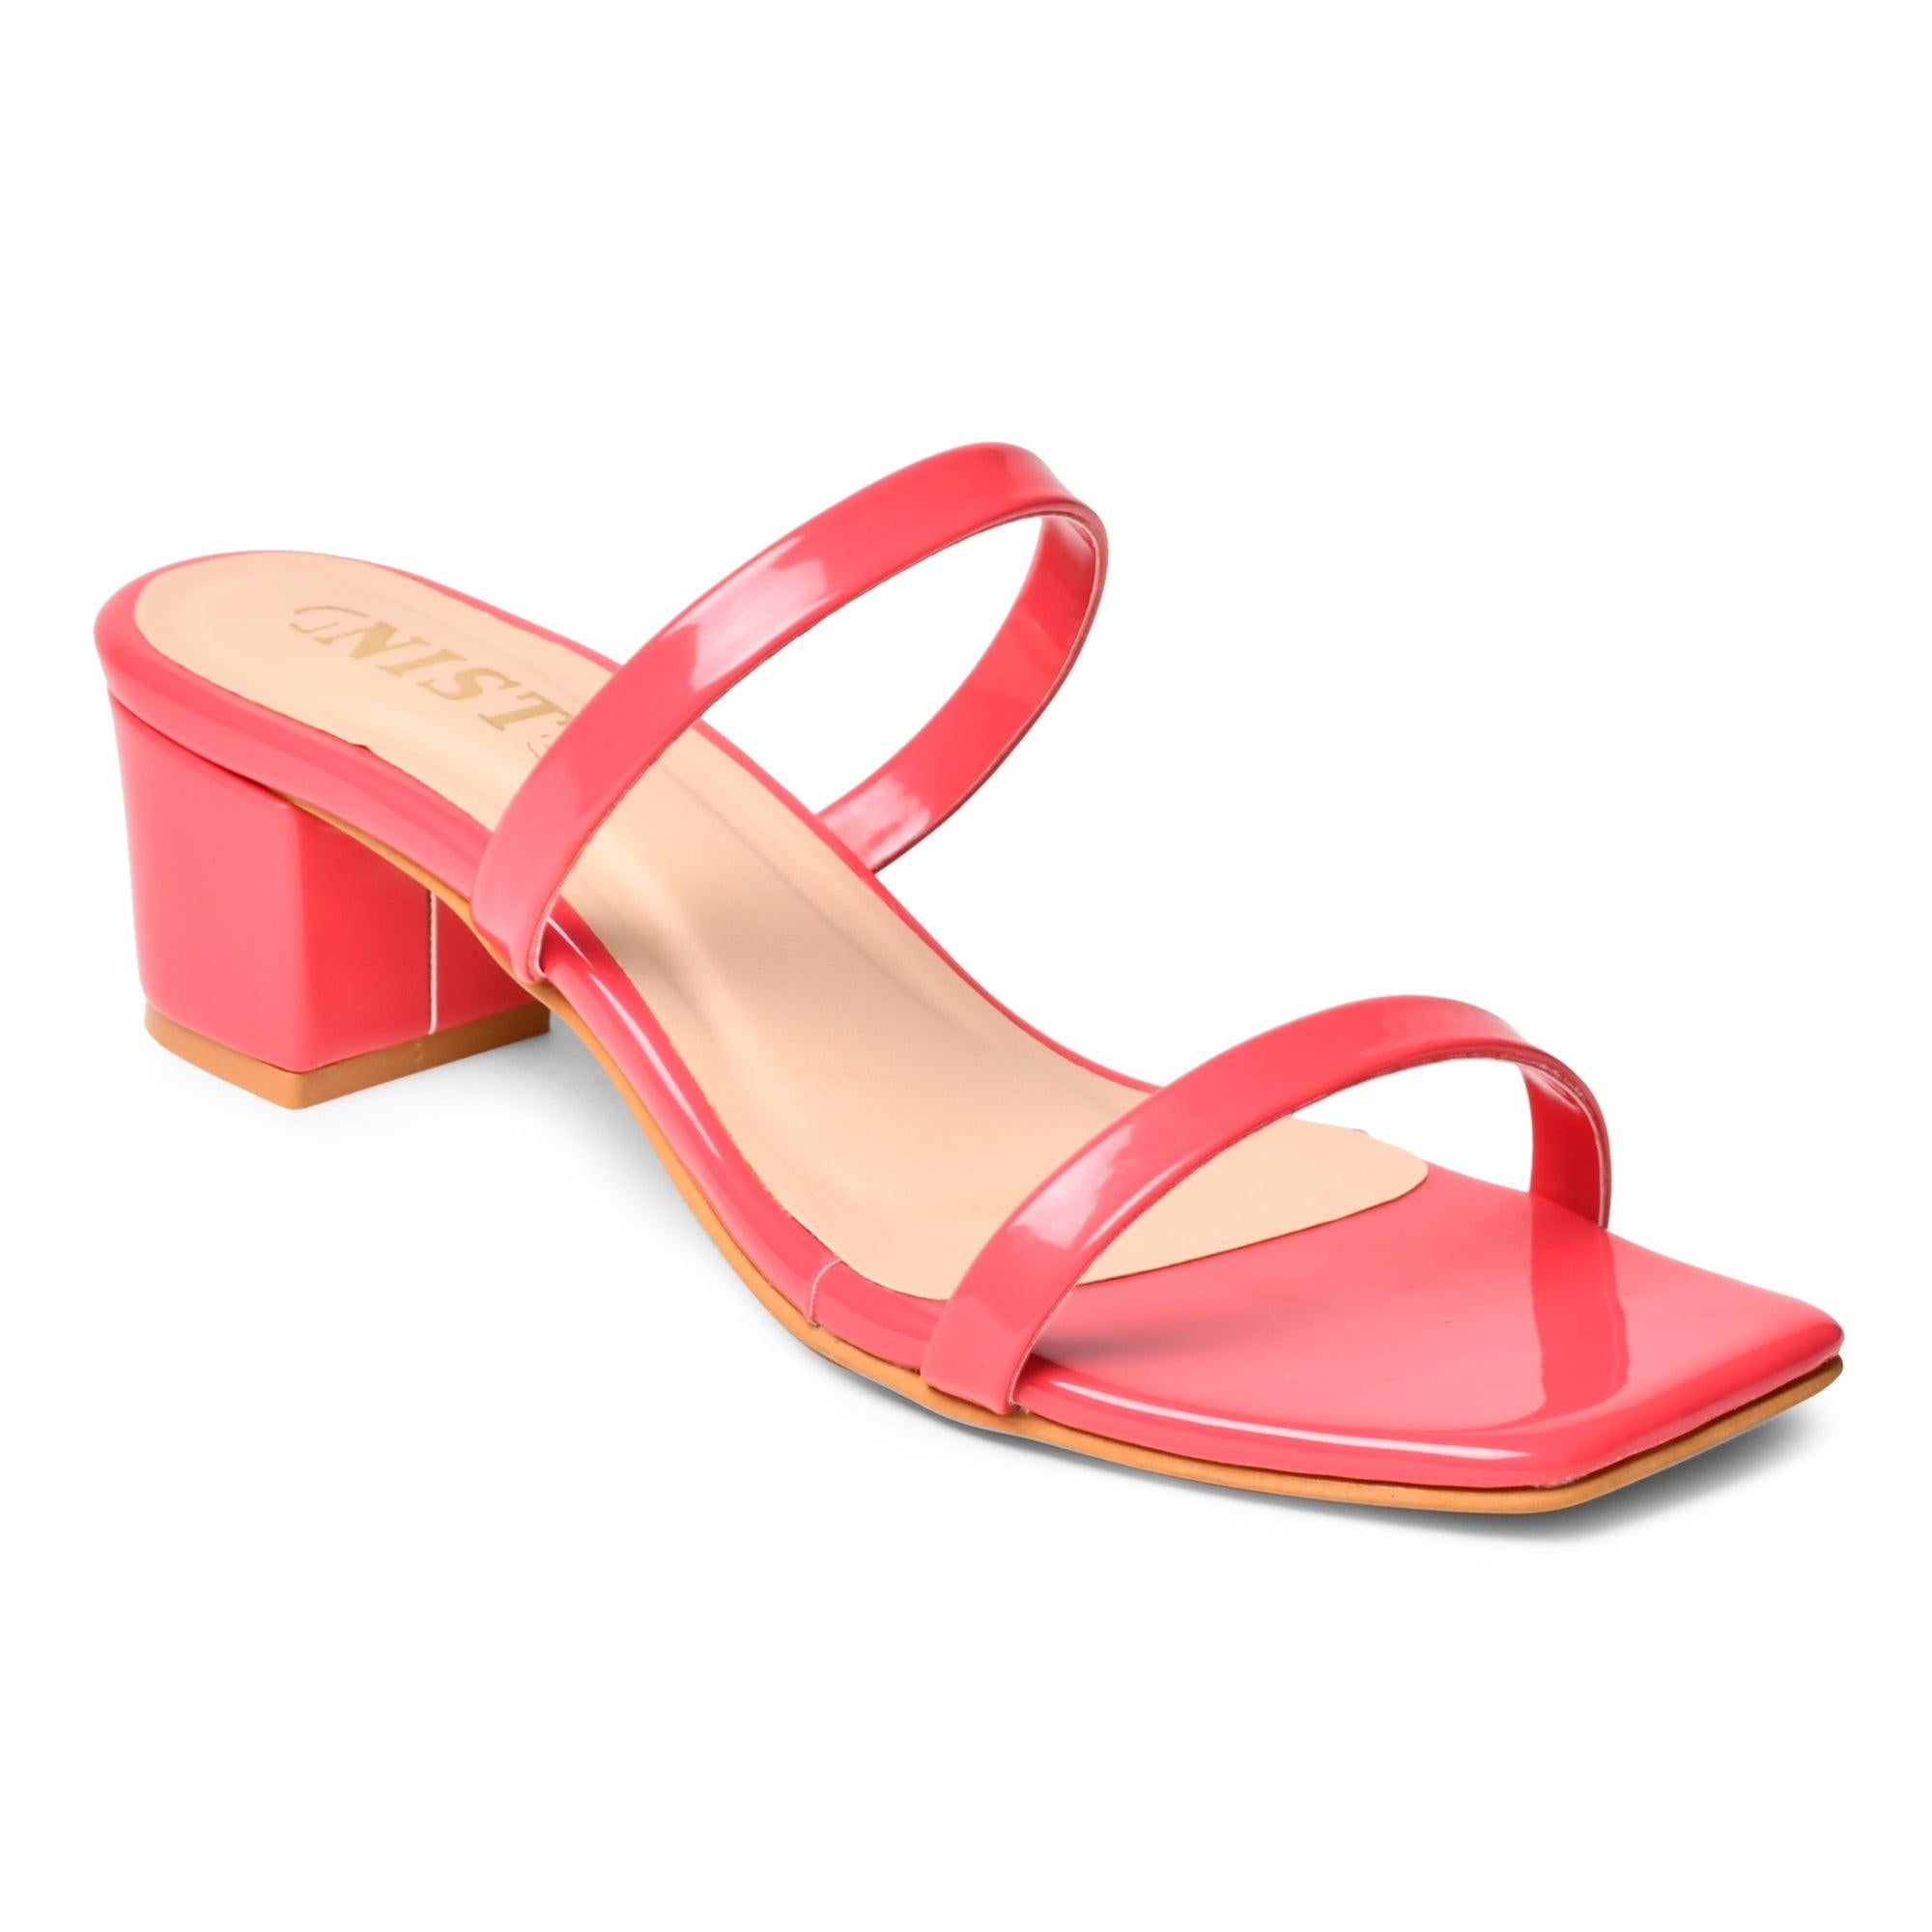 GNIST Chunky Double Strap Coral Block Heels - Gnist Fashion